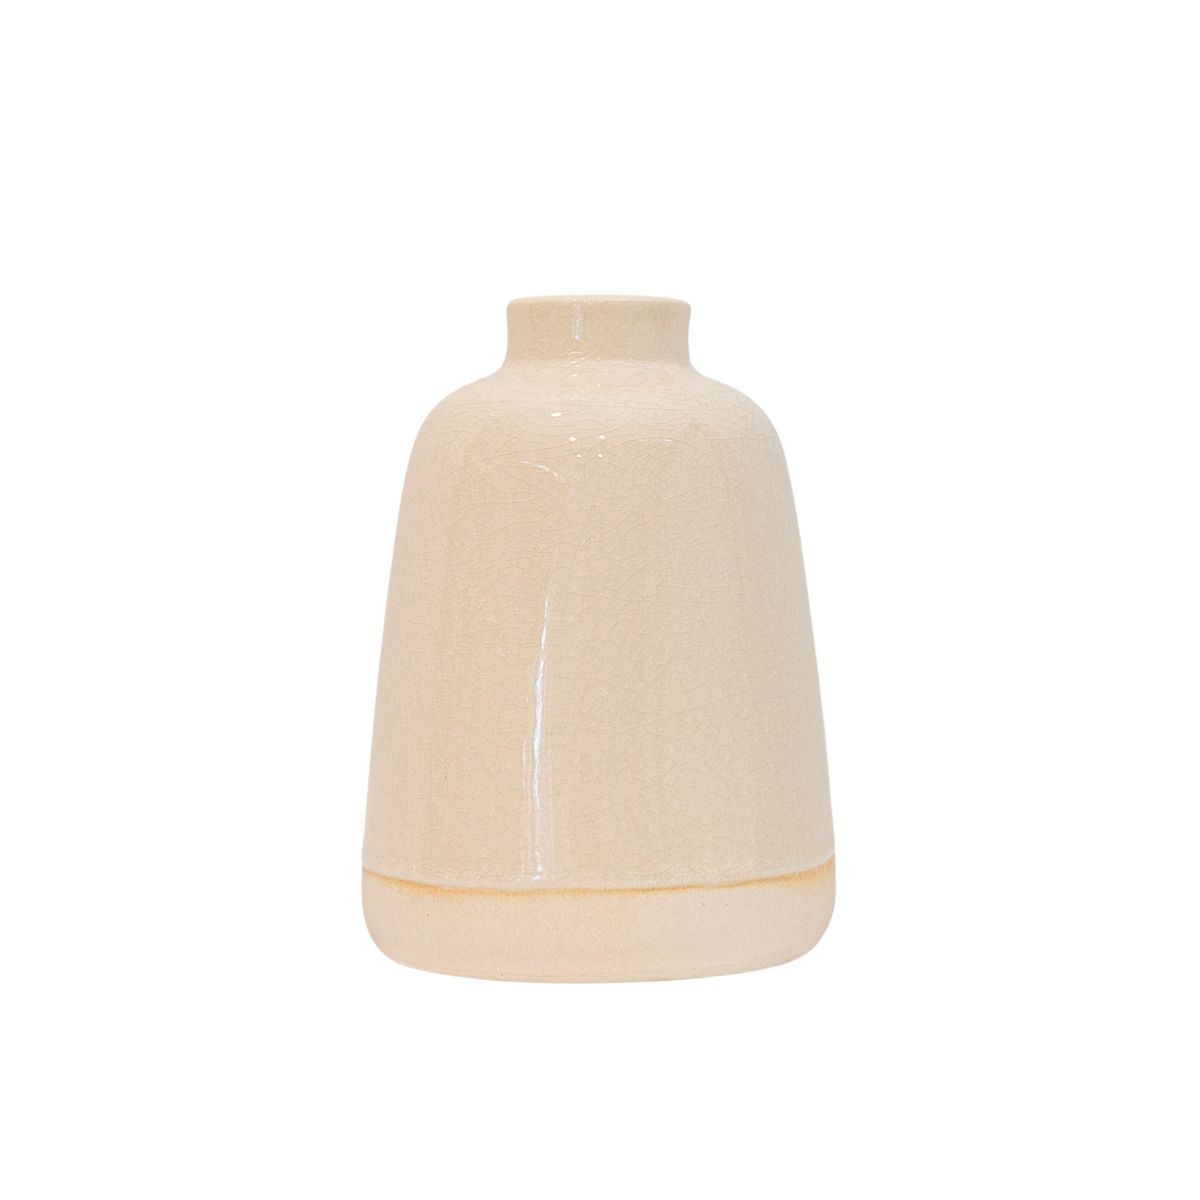 Smooth Tapered Bud Vase White Stoneware by Foreside Home & Garden | Target